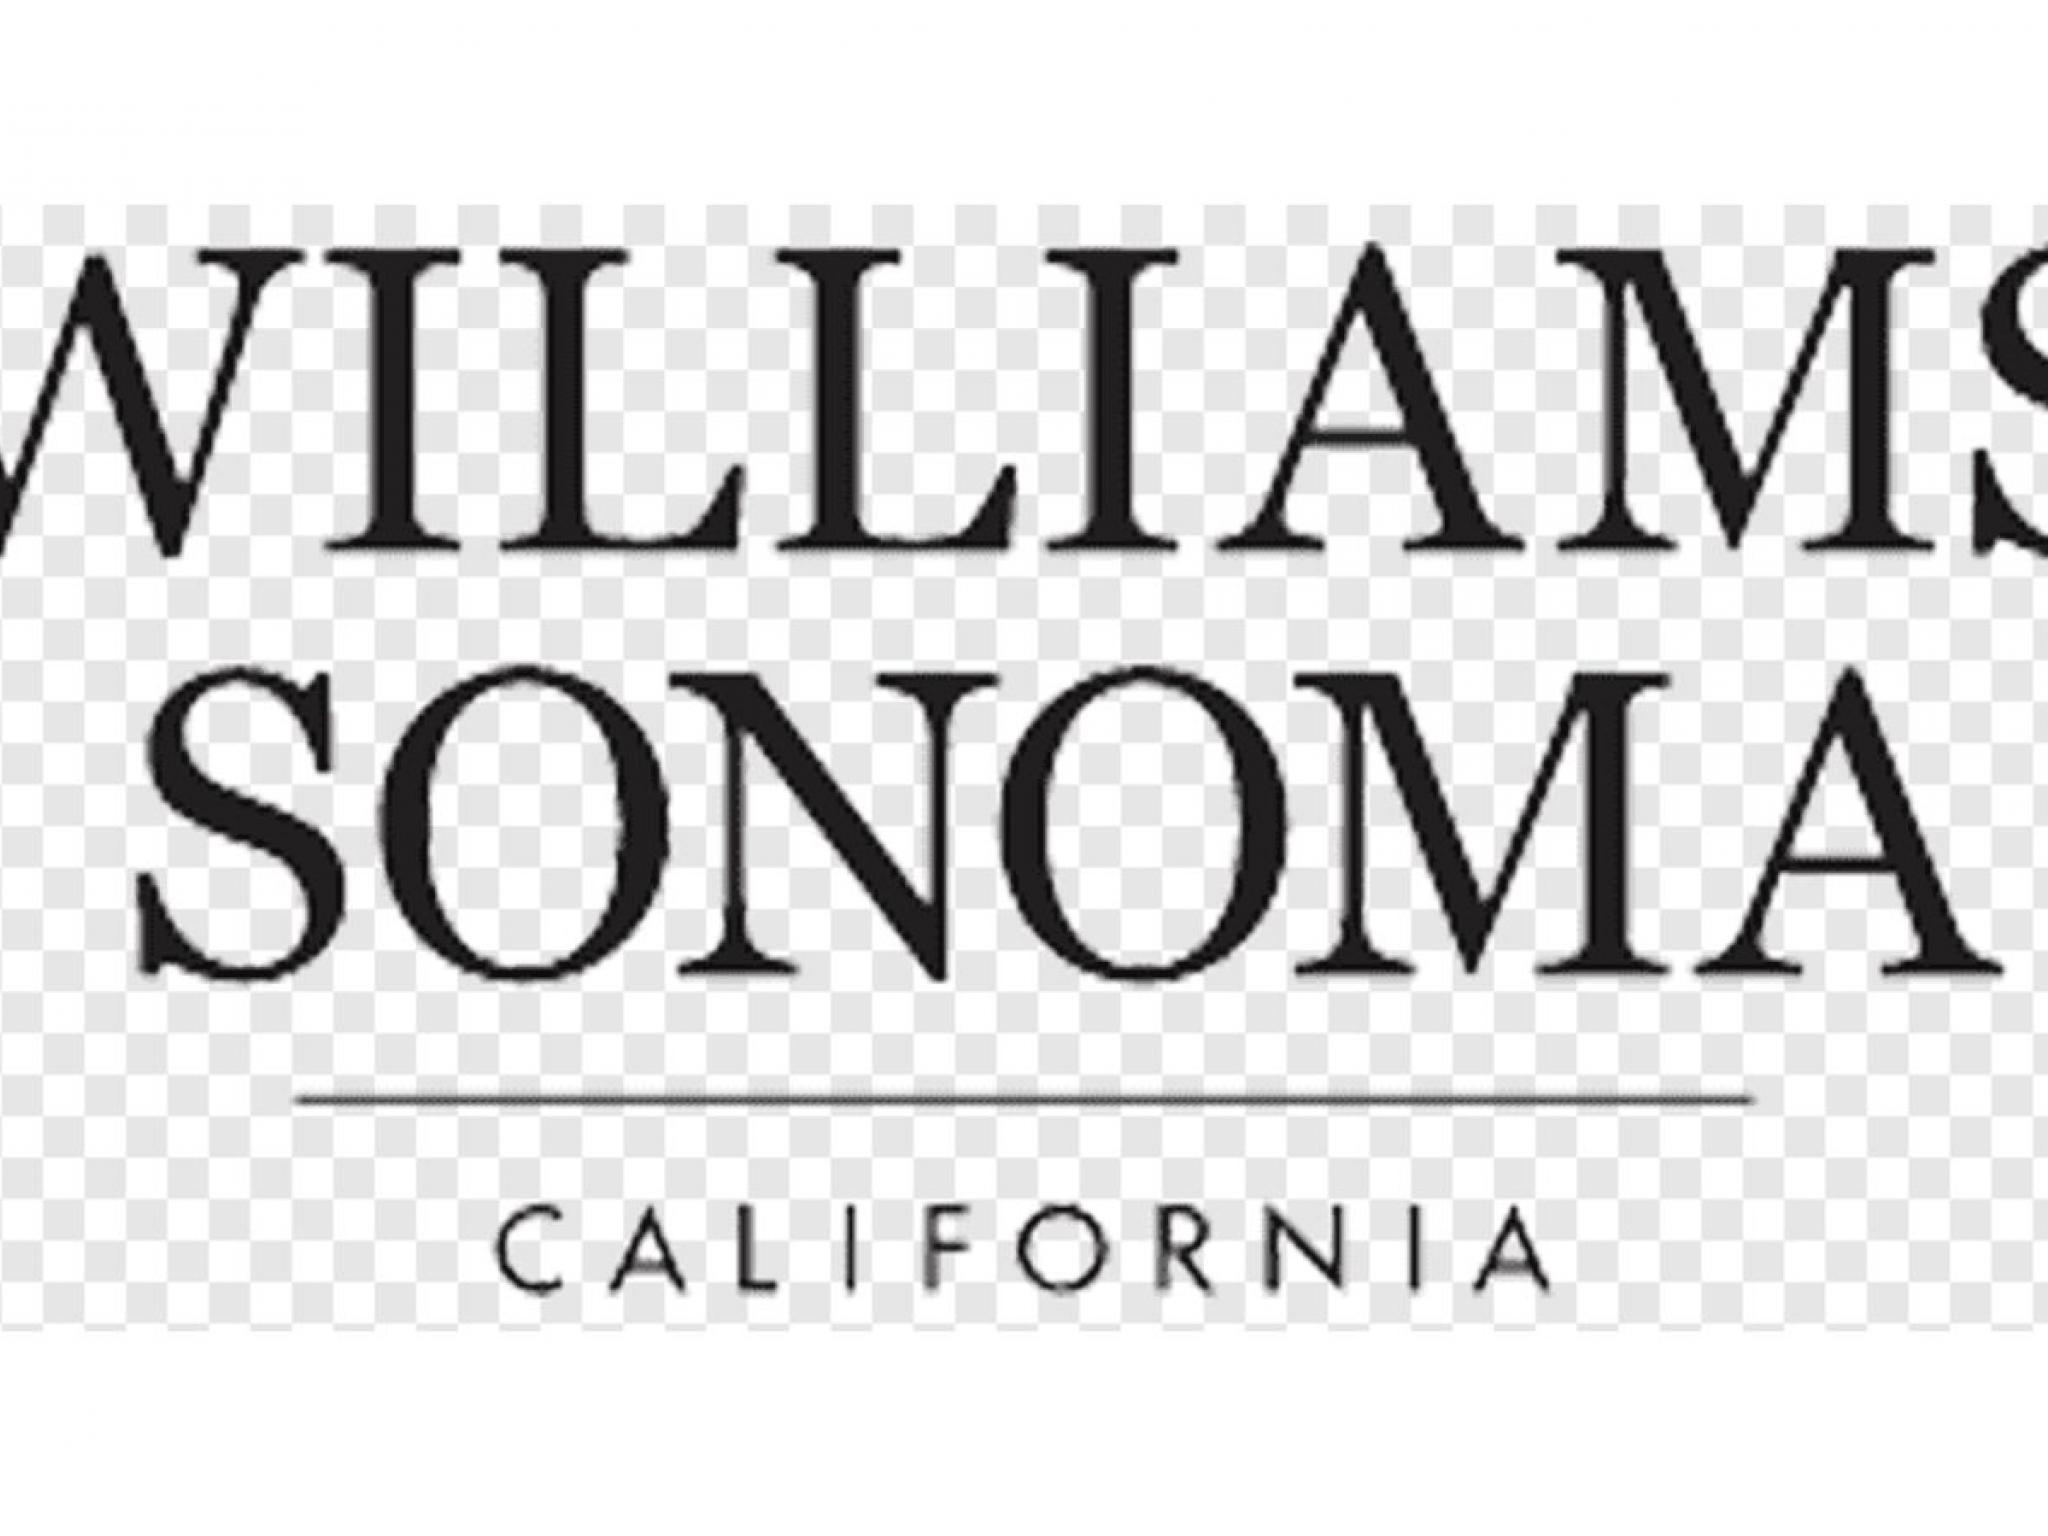  williams-sonoma-ess-tech-and-other-big-stocks-moving-higher-on-monday 